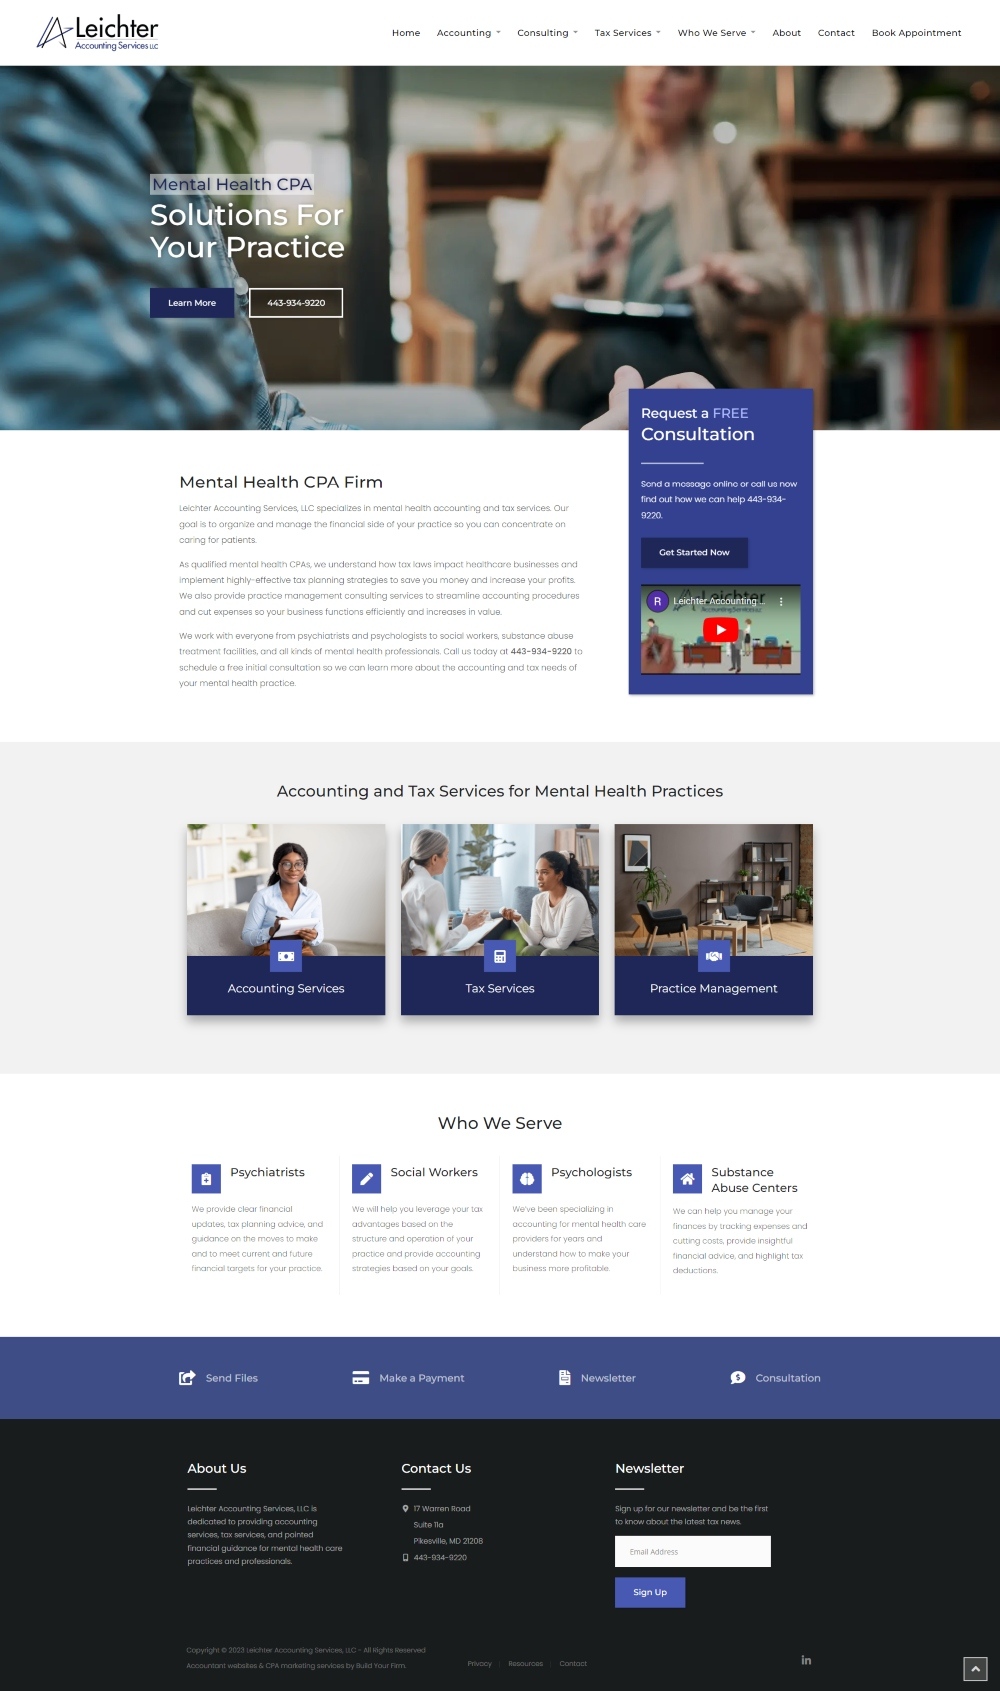 Website of Leichter Accounting Services LLC